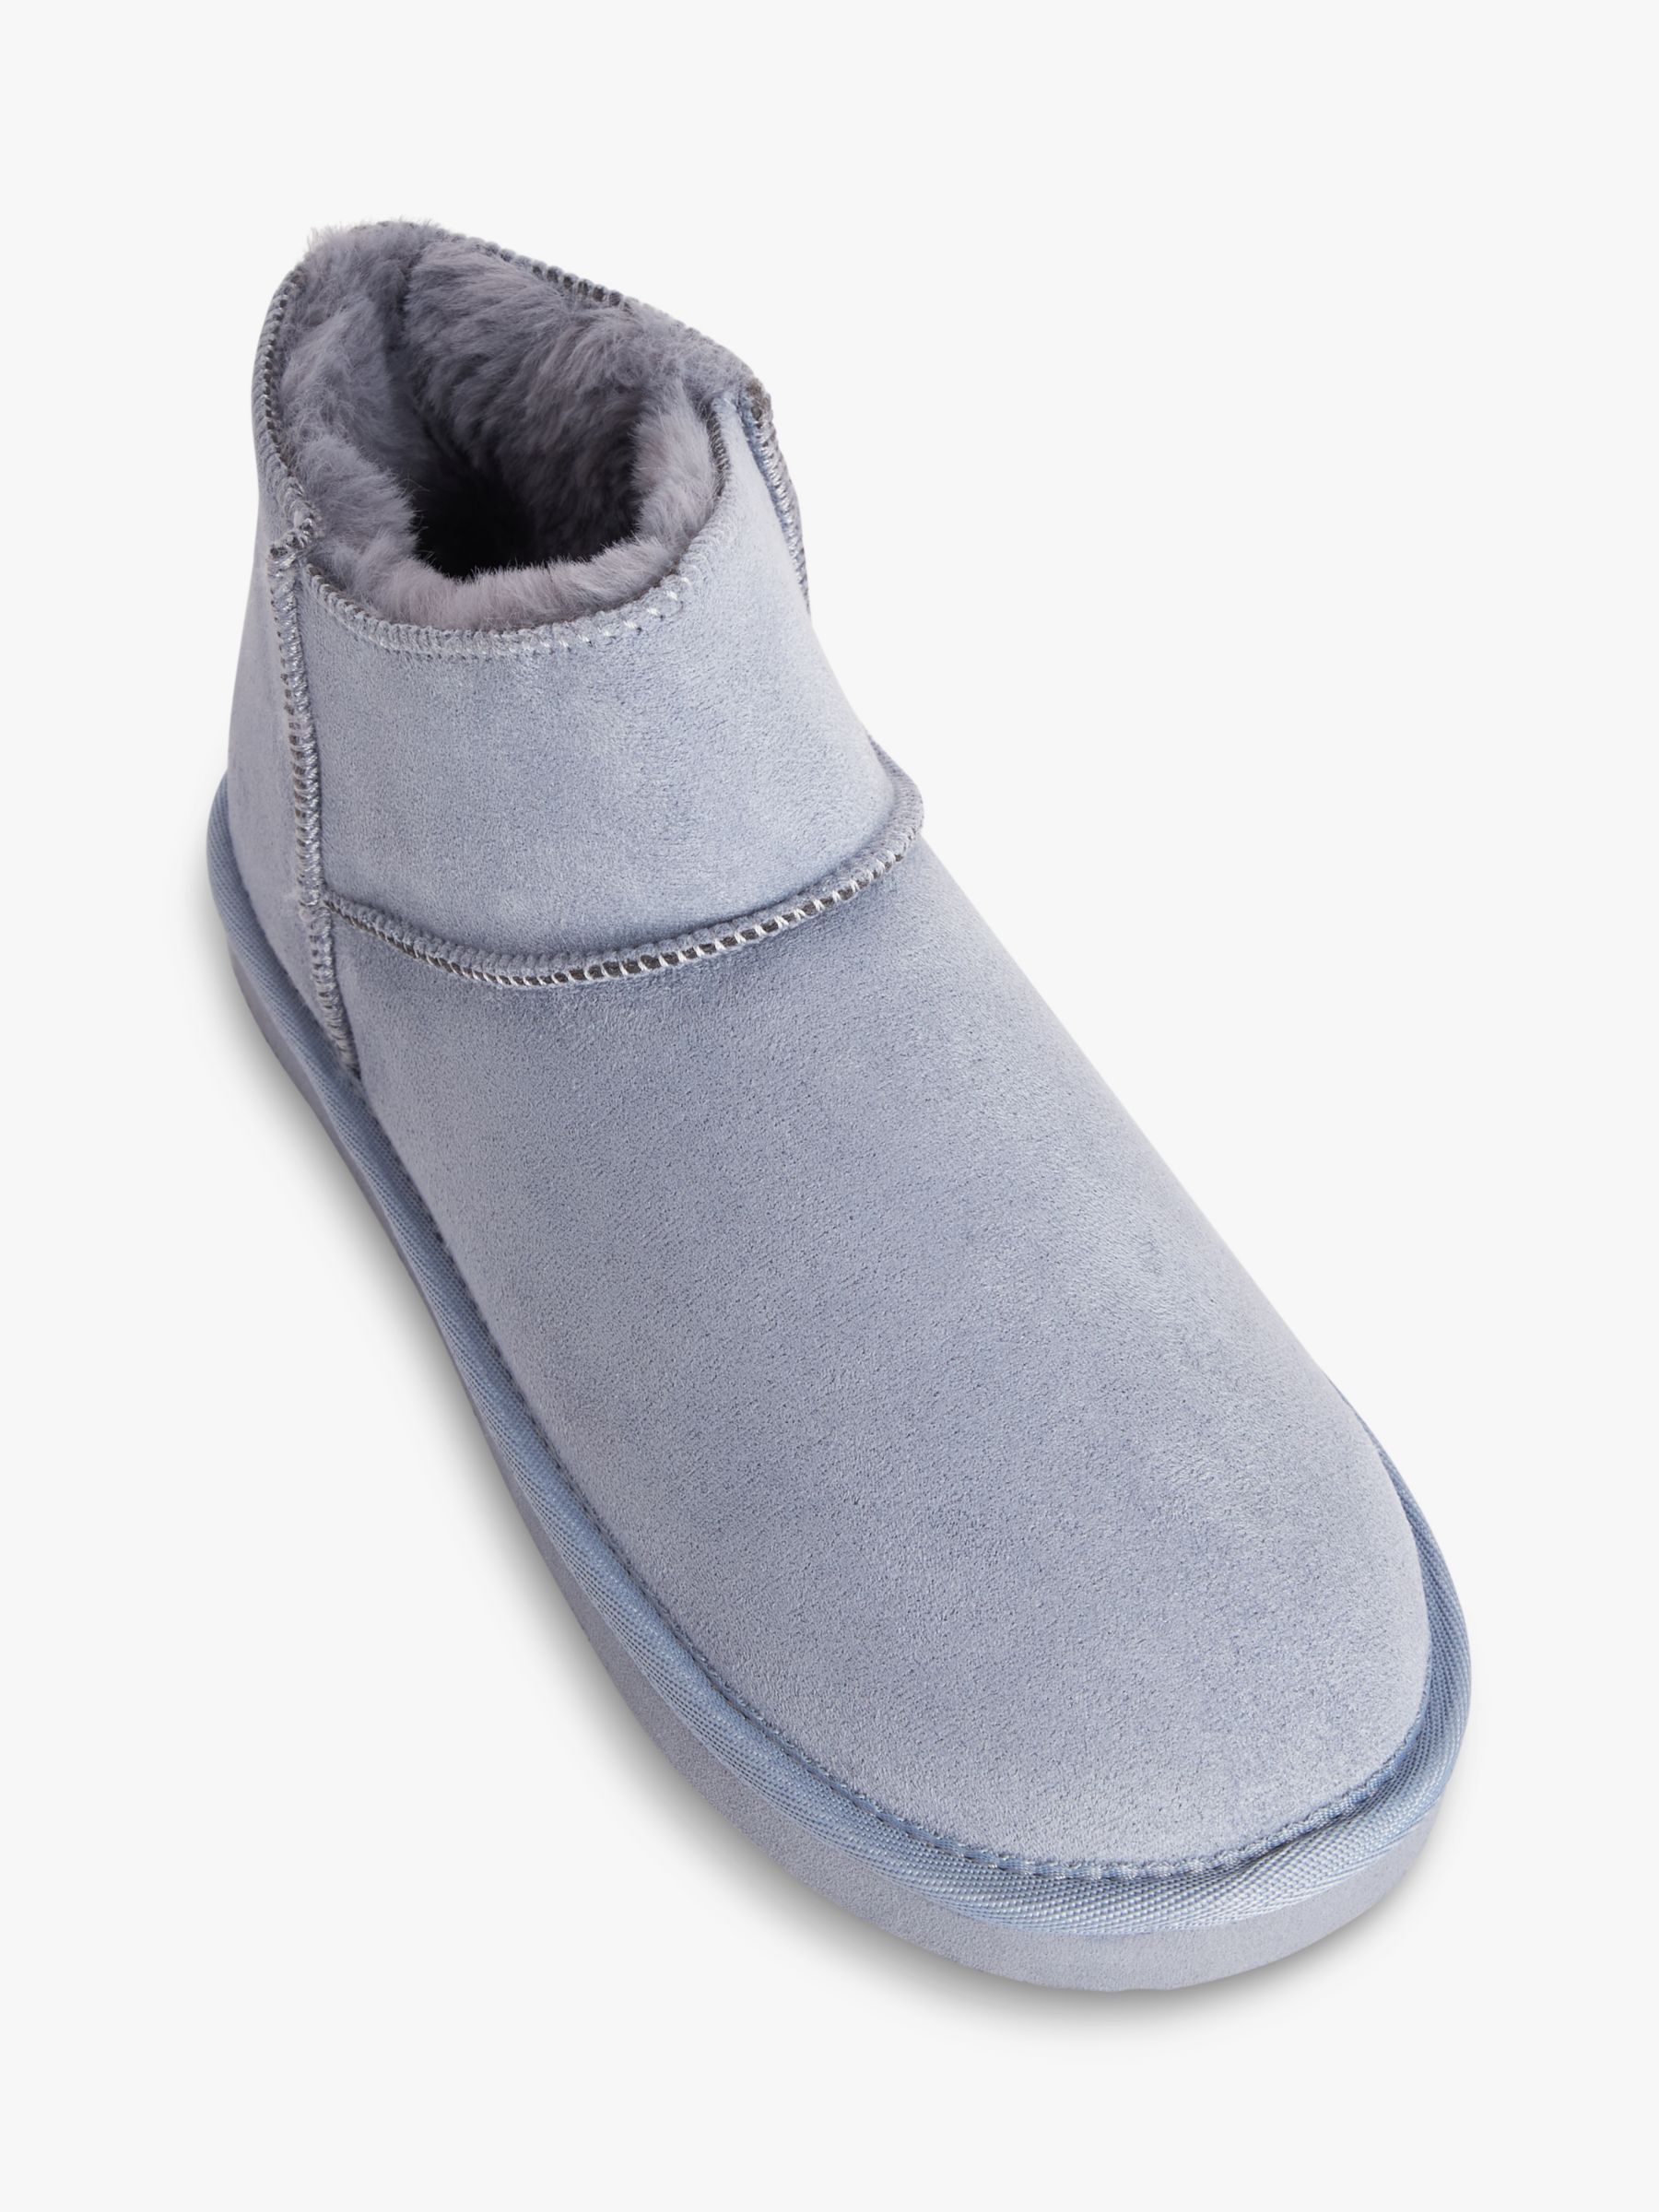 John Lewis ANYDAY Microsuede Faux Fur Cropped Slipper Boots, Grey, M